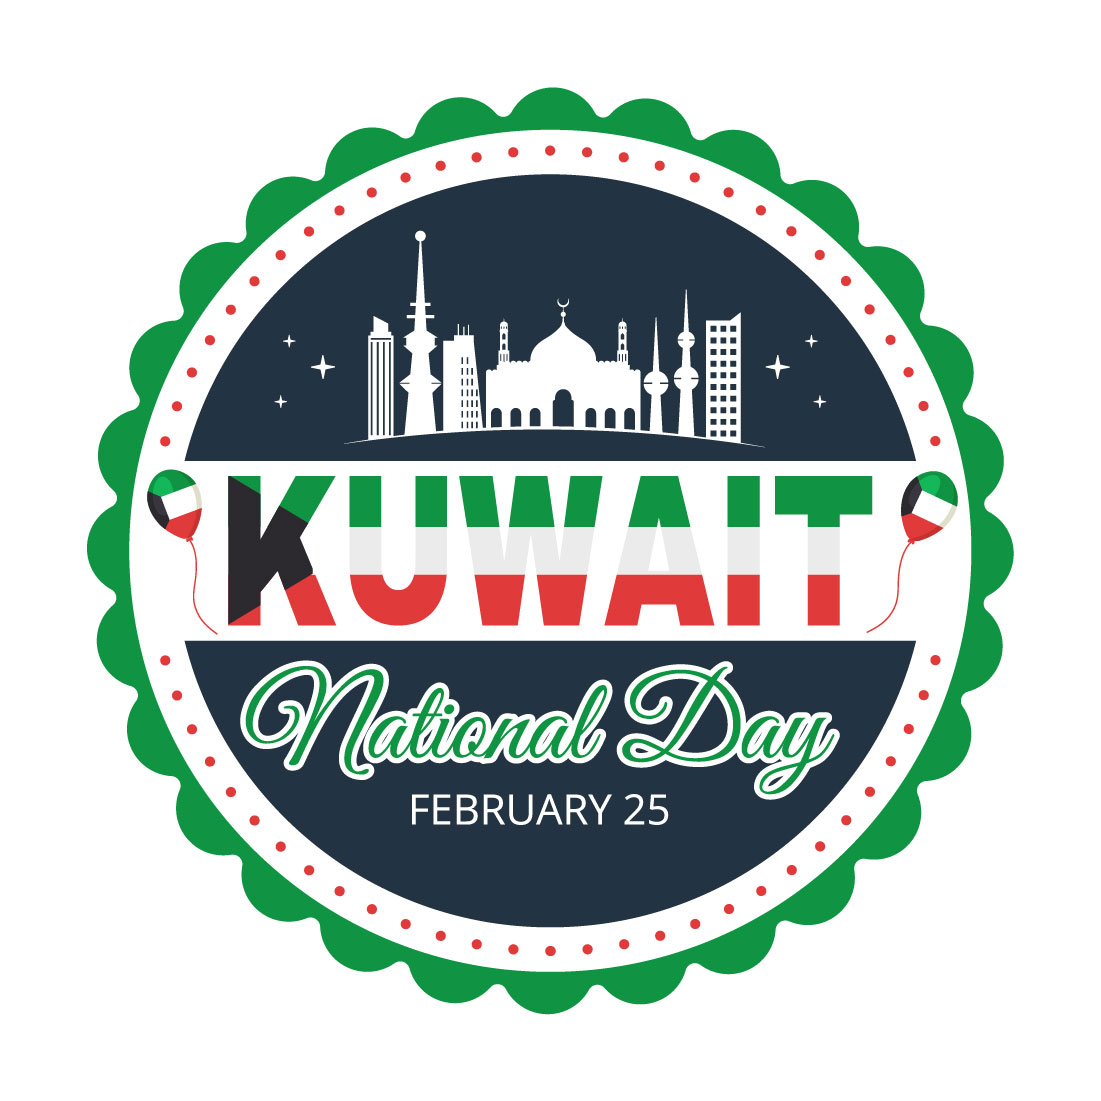 Kuwait Day Graphics Design cover image.